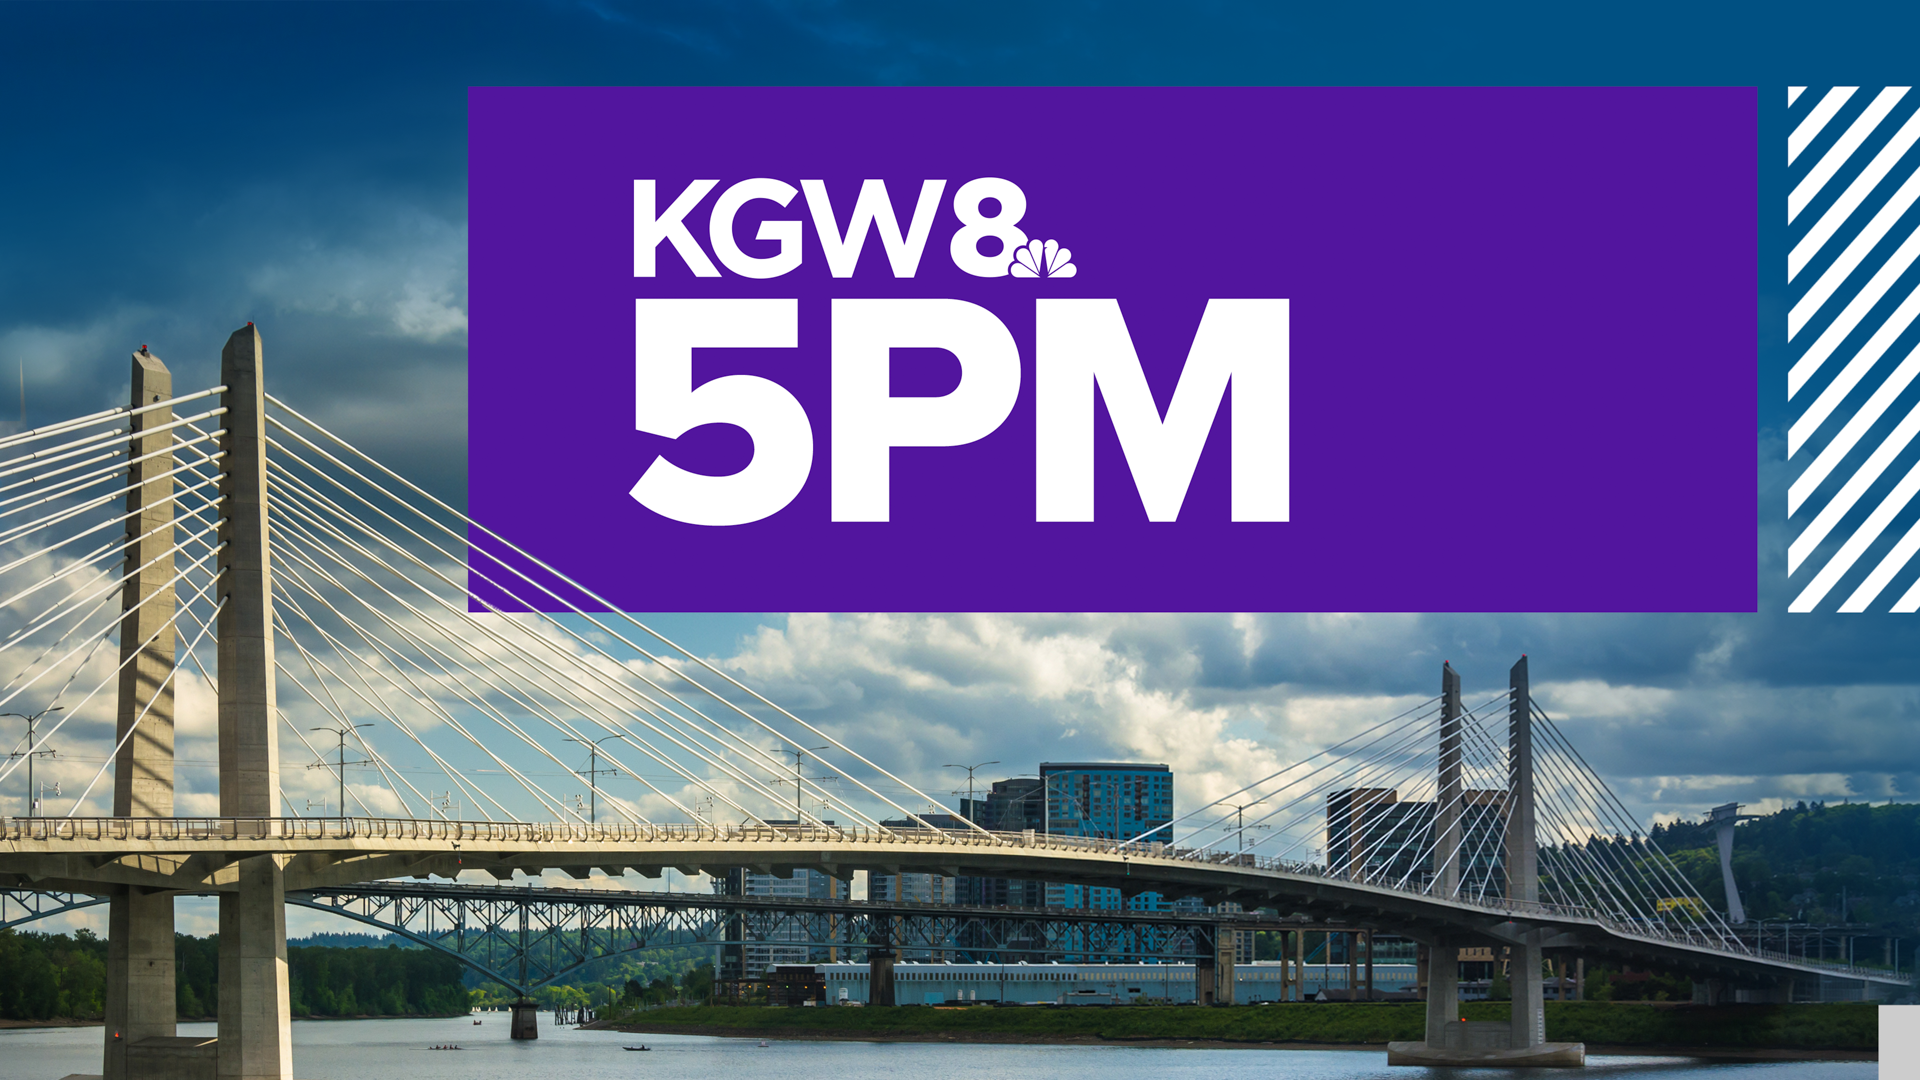 KGW Top Stories: 5 p.m., Wednesday, Sept. 21, 2022